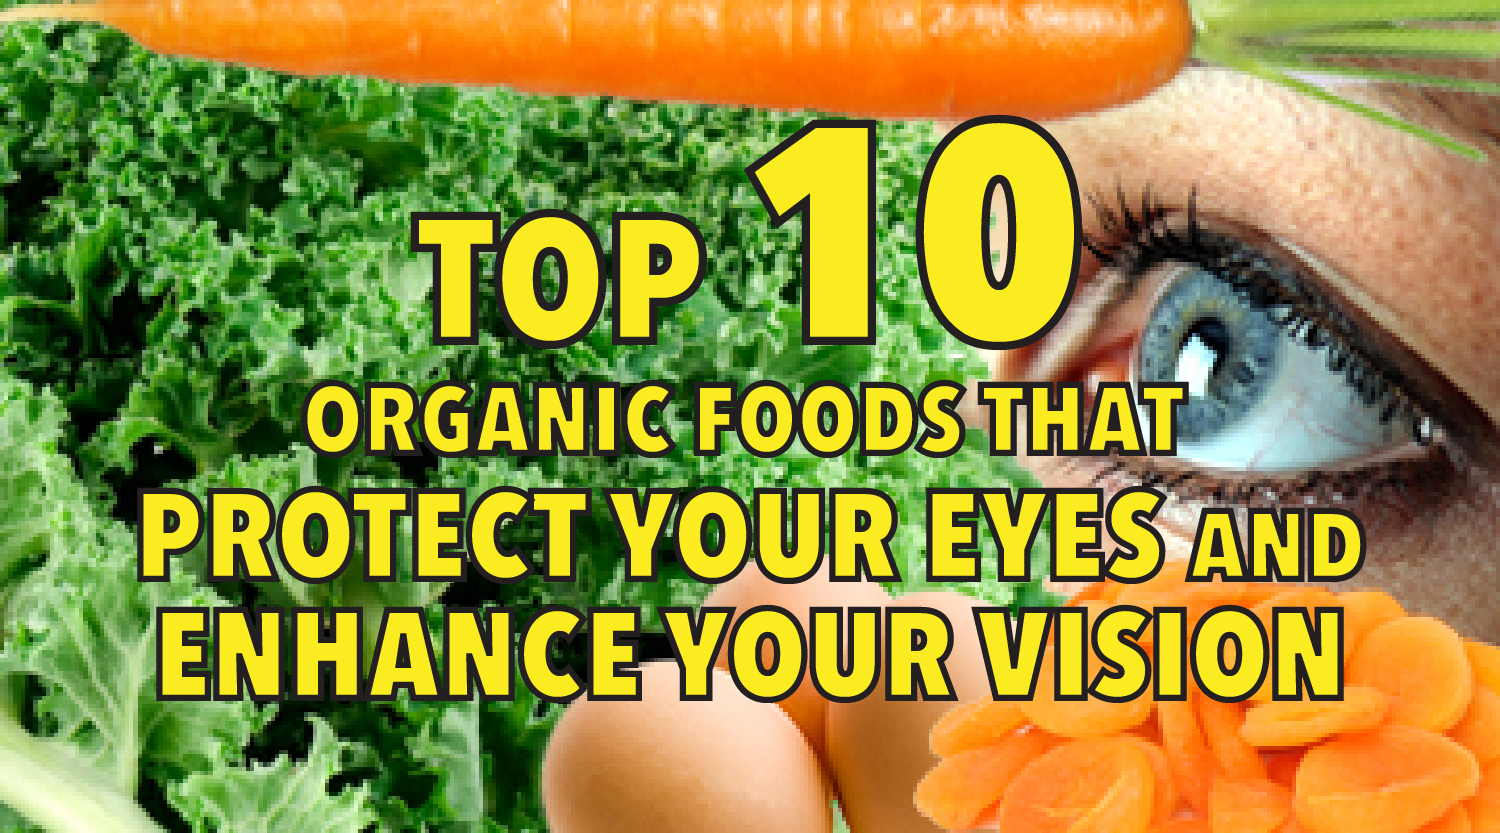 Top 10 Organic Foods that Protect Your Eyes and Enhance Your Vision